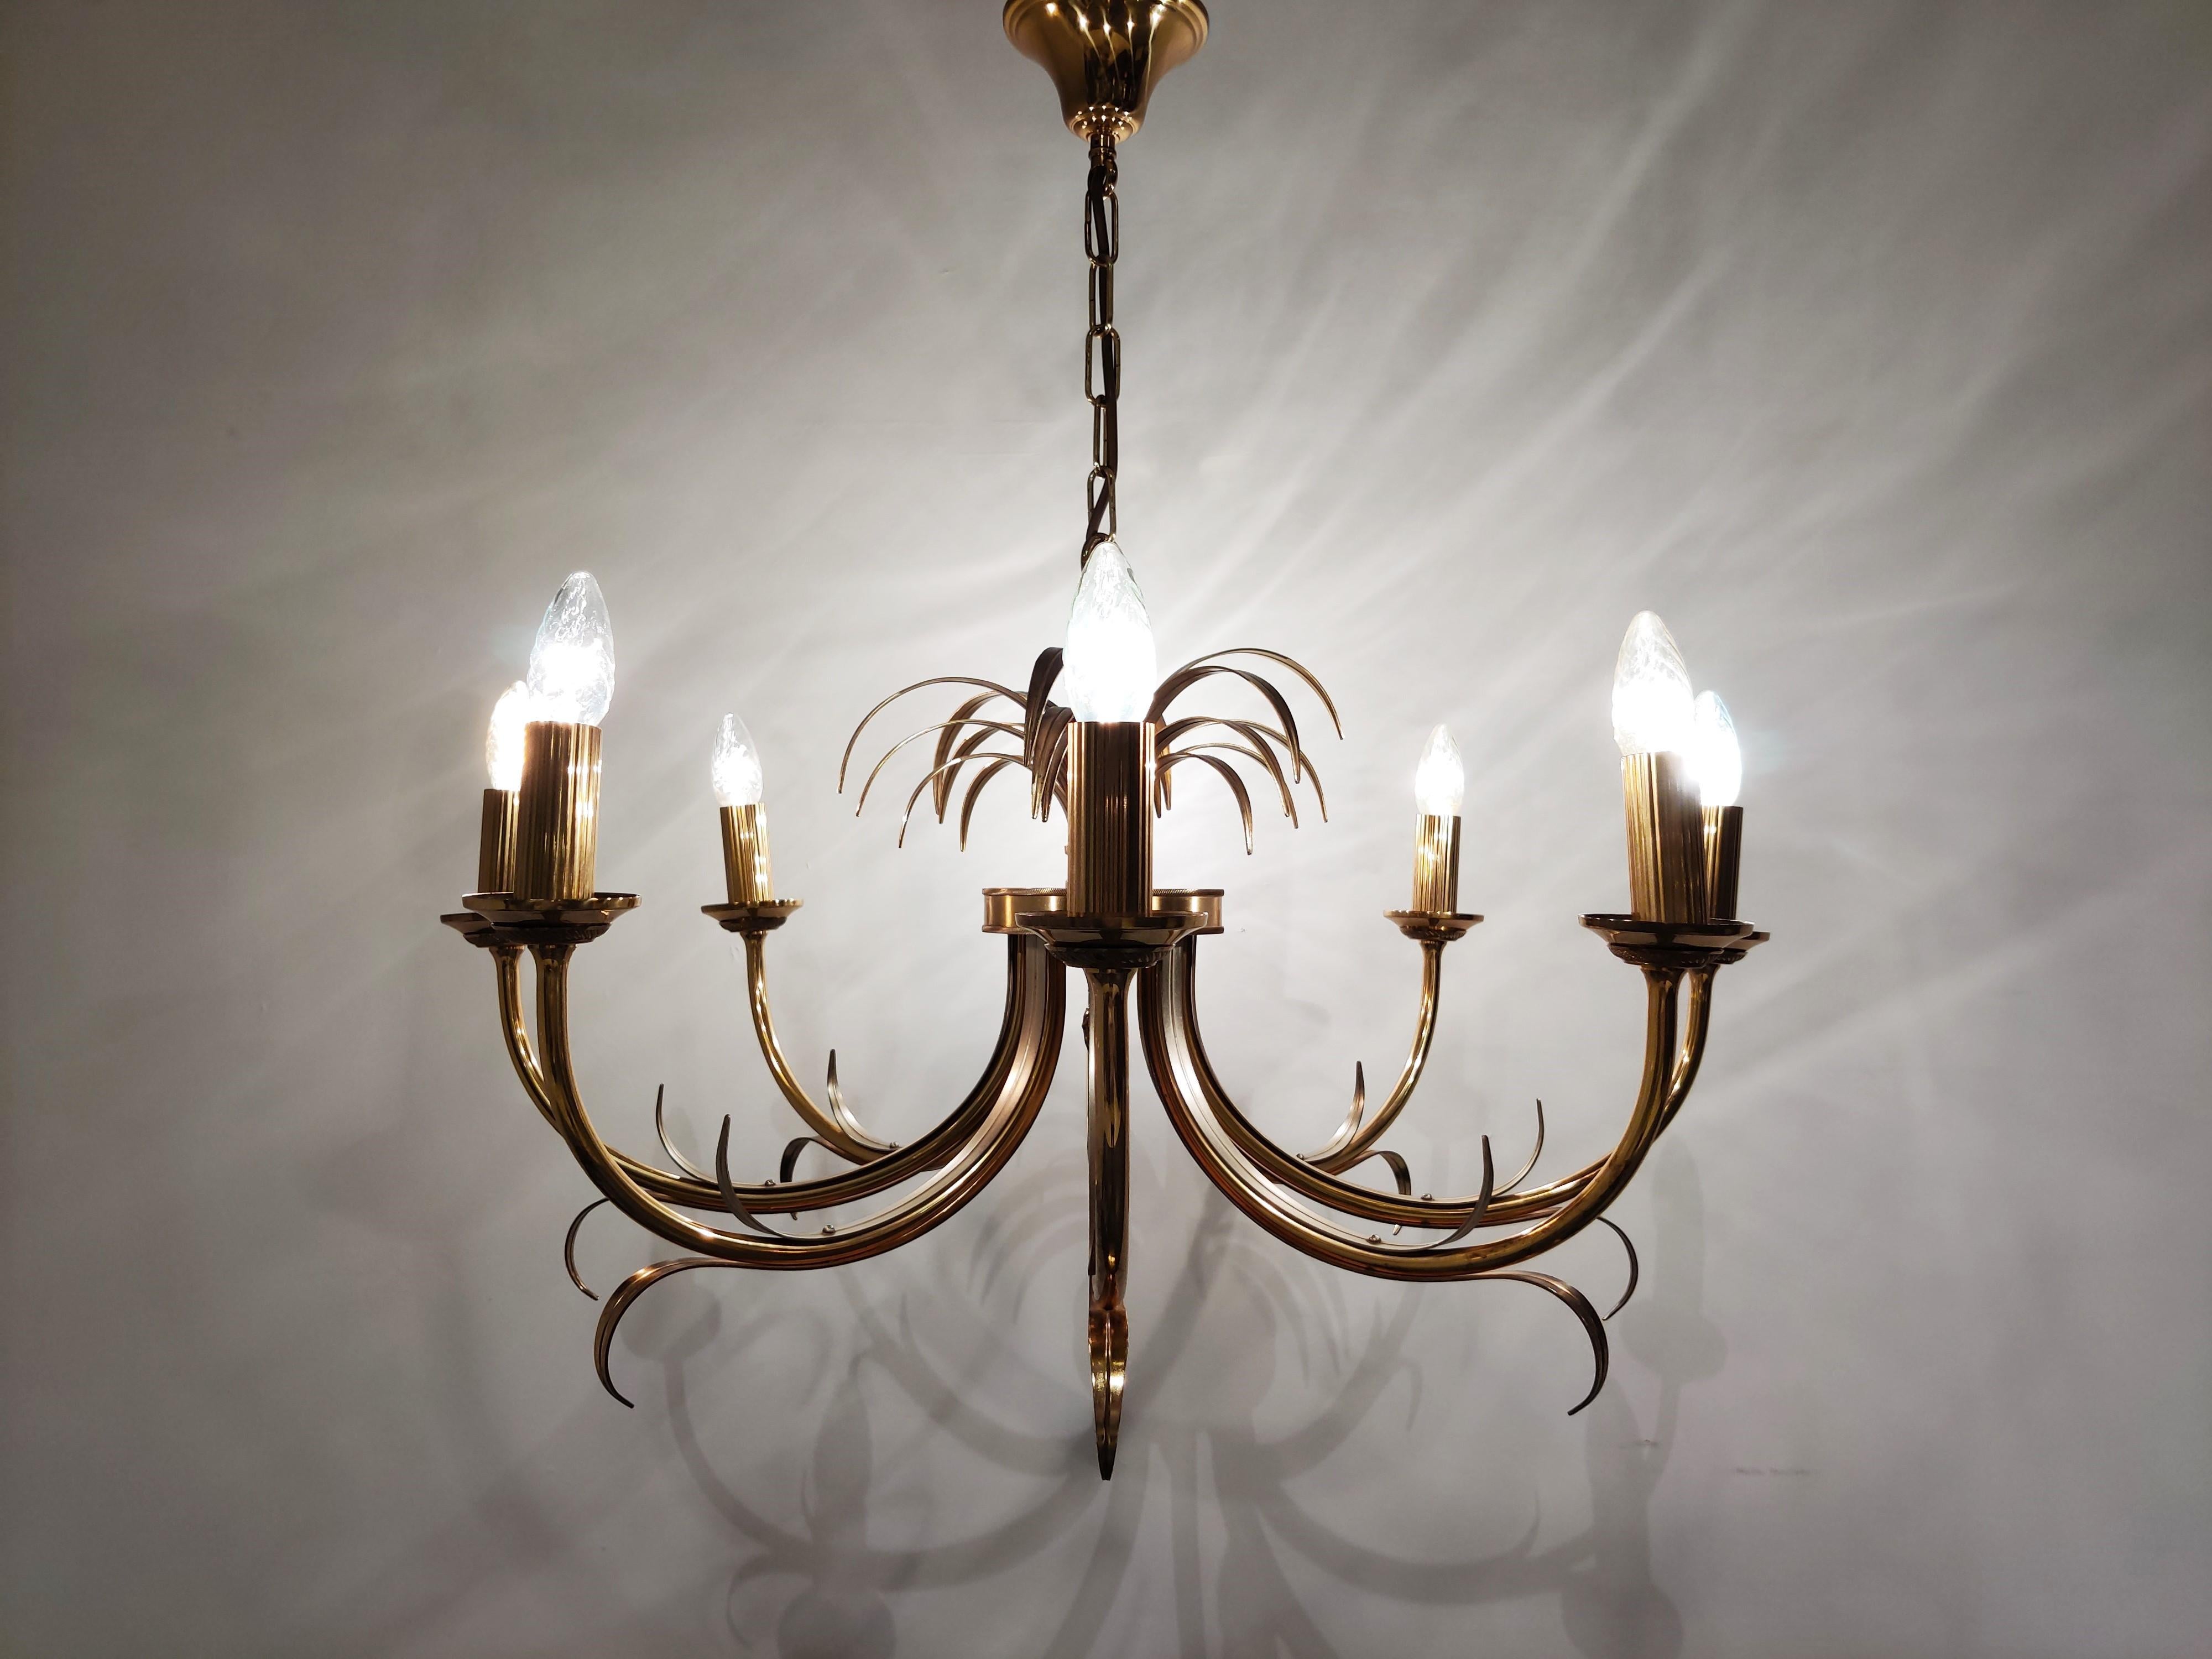 Beautiful, eye-catching pineapple leaf chandelier made from brass and chrome with eight light points.

This Regency chandelier strongly resembles the style of Maison Jansen.

Good condition normal wear on the brass.

1970s,